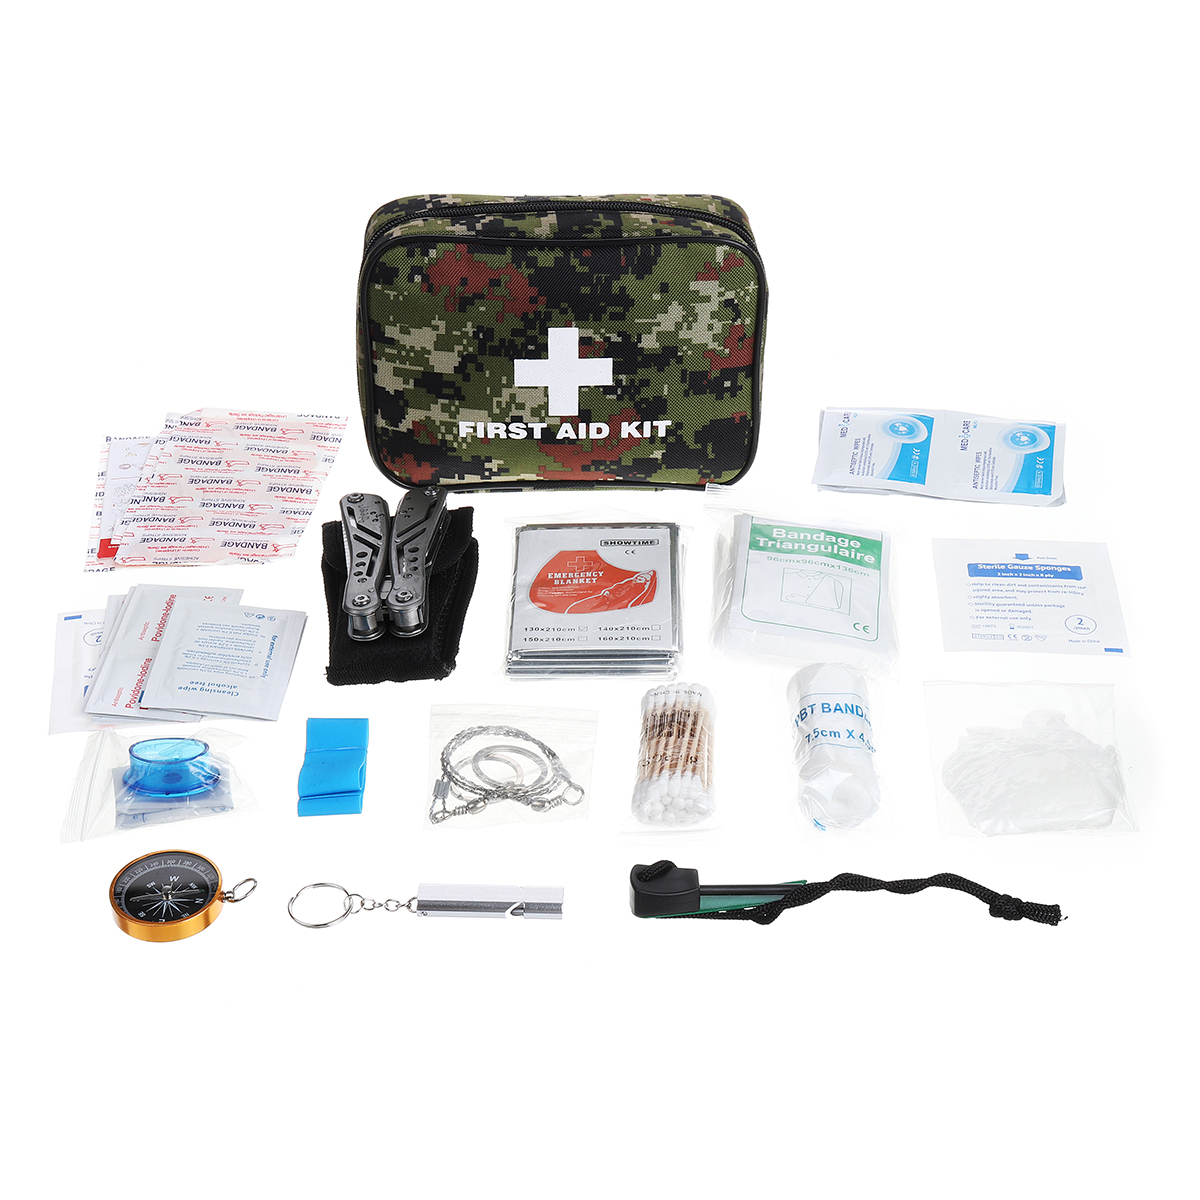 

82Pcs IN 1 Outdoor SOS Emergency Survival Kit Bag First Aid Kit For Home Office Camping Hiking Travelling